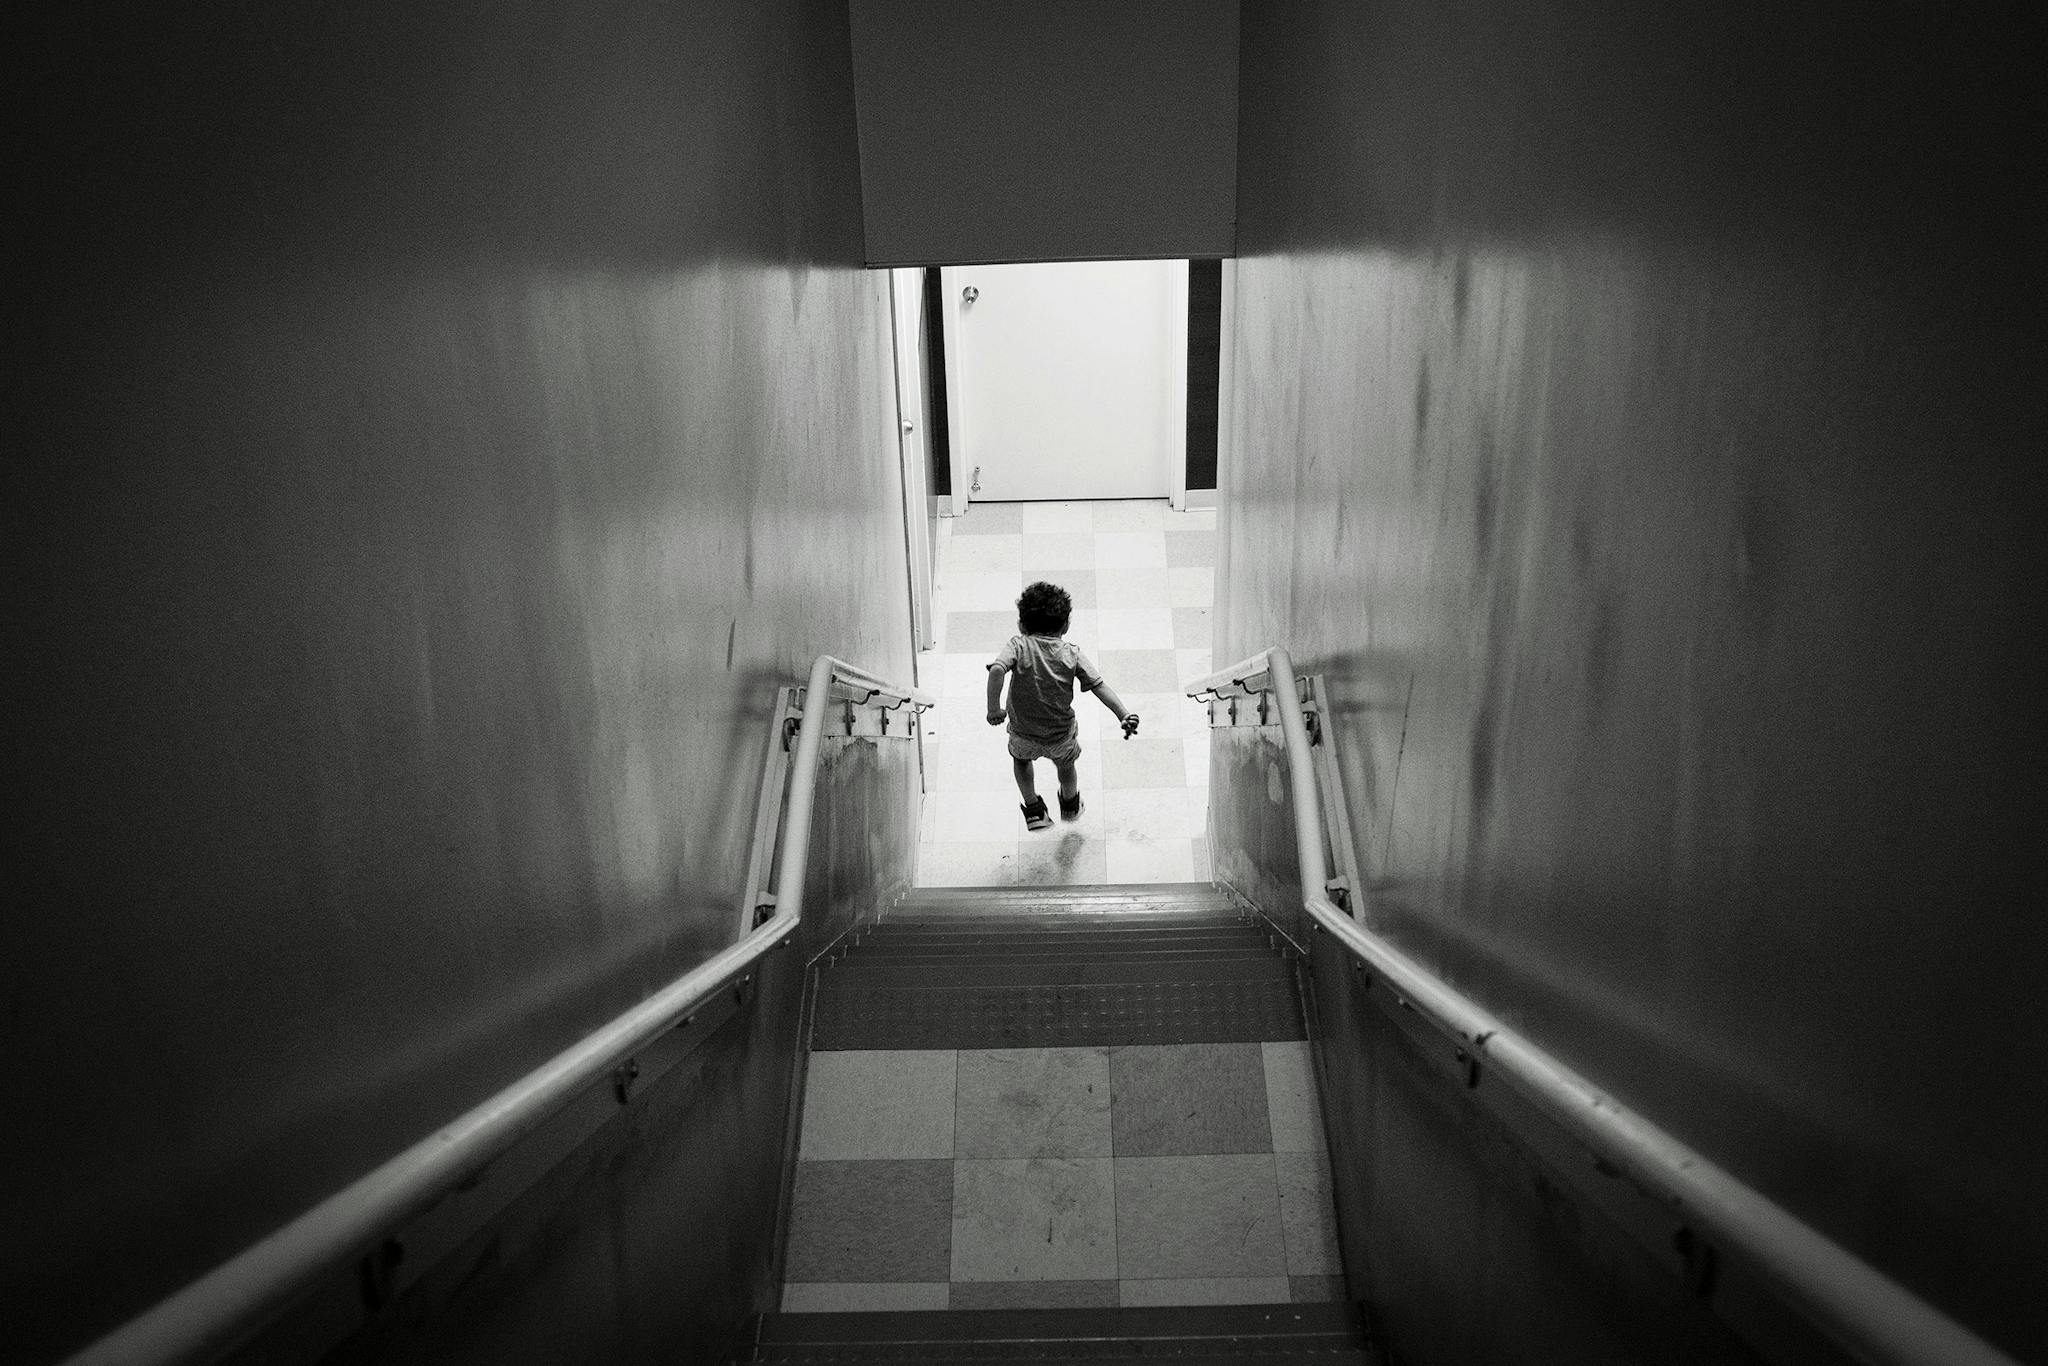 A young boy jumps down a stairwell on the way to the shelter’s cafeteria after lunch is announced over the intercom.